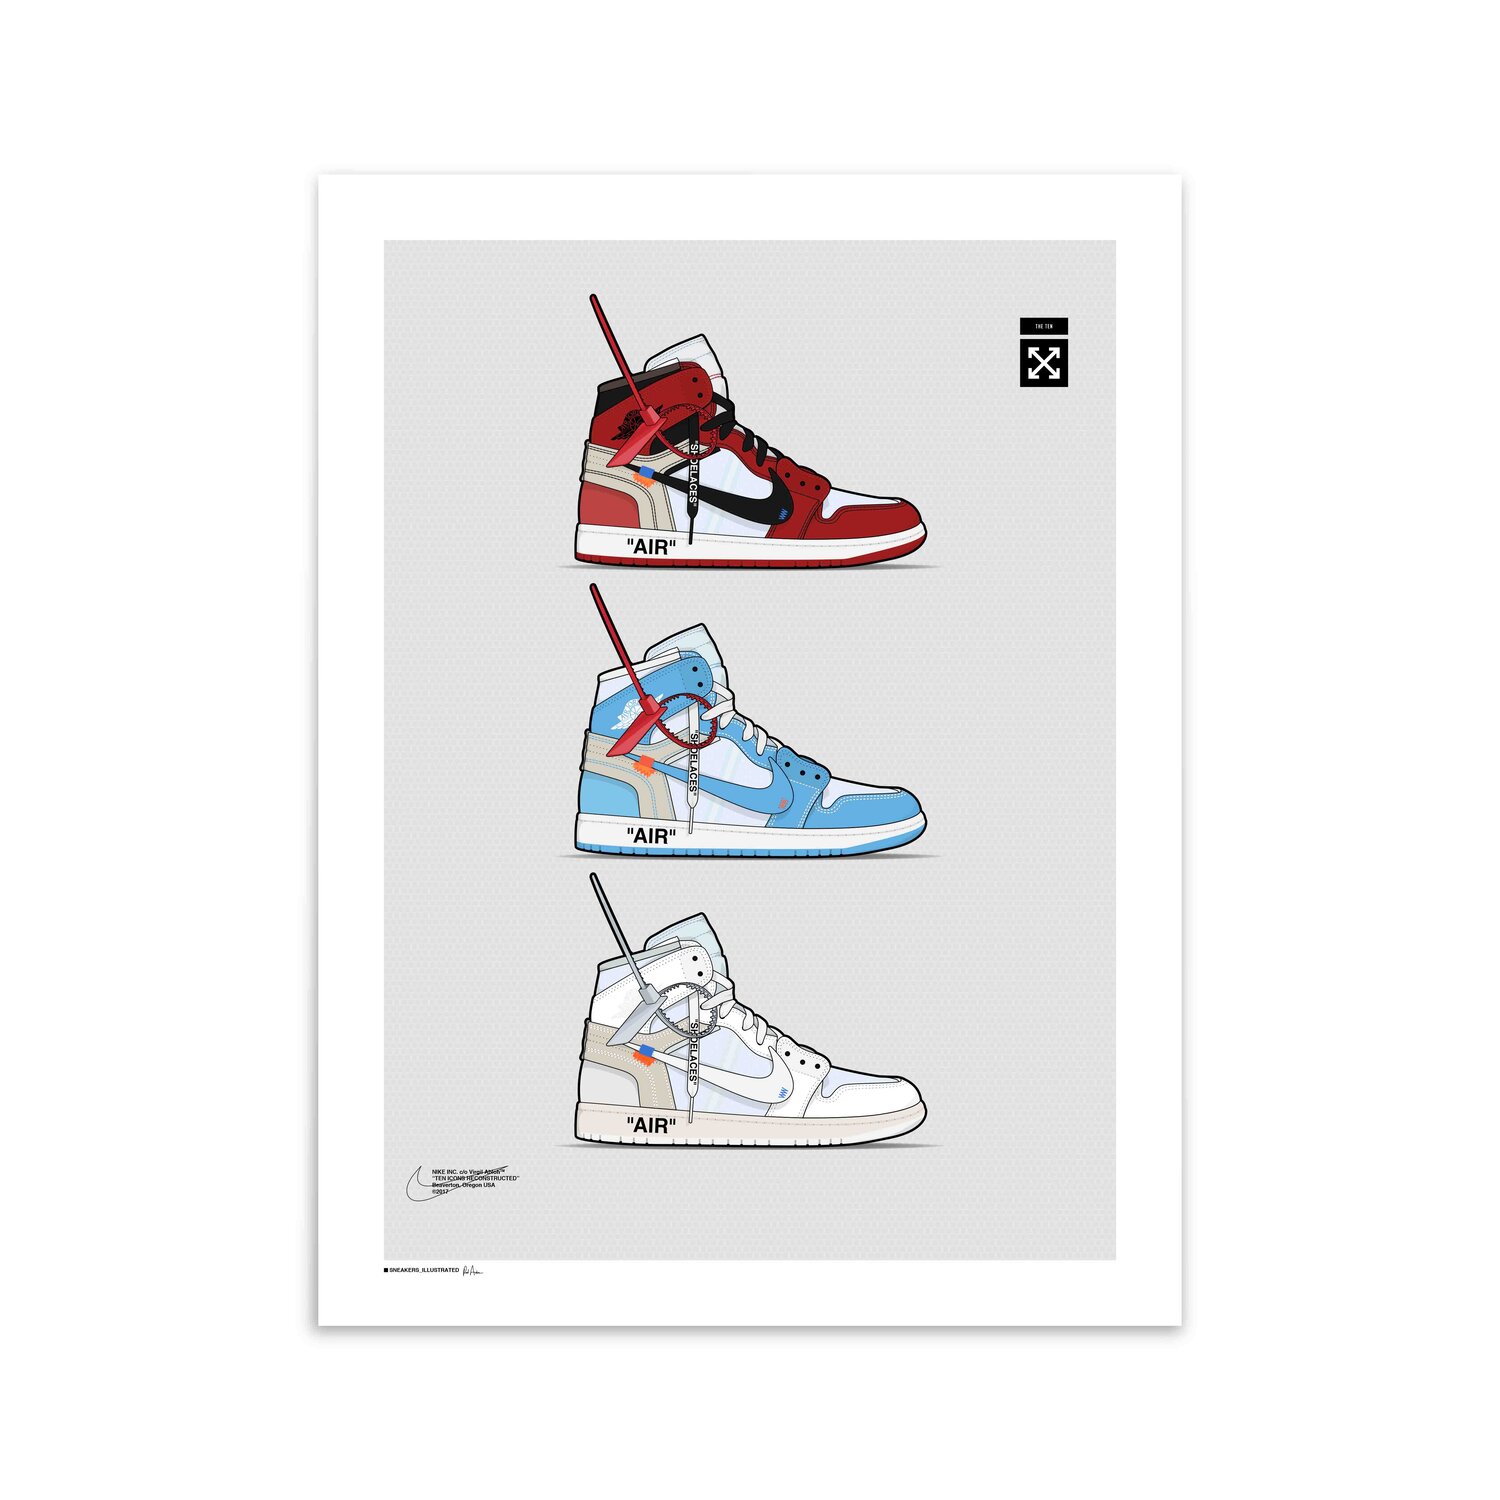 Off-White c/o NIKE, INC. THE TEN Campaign - WNW  Nike campaign, Sneaker  posters, Sneakers illustration